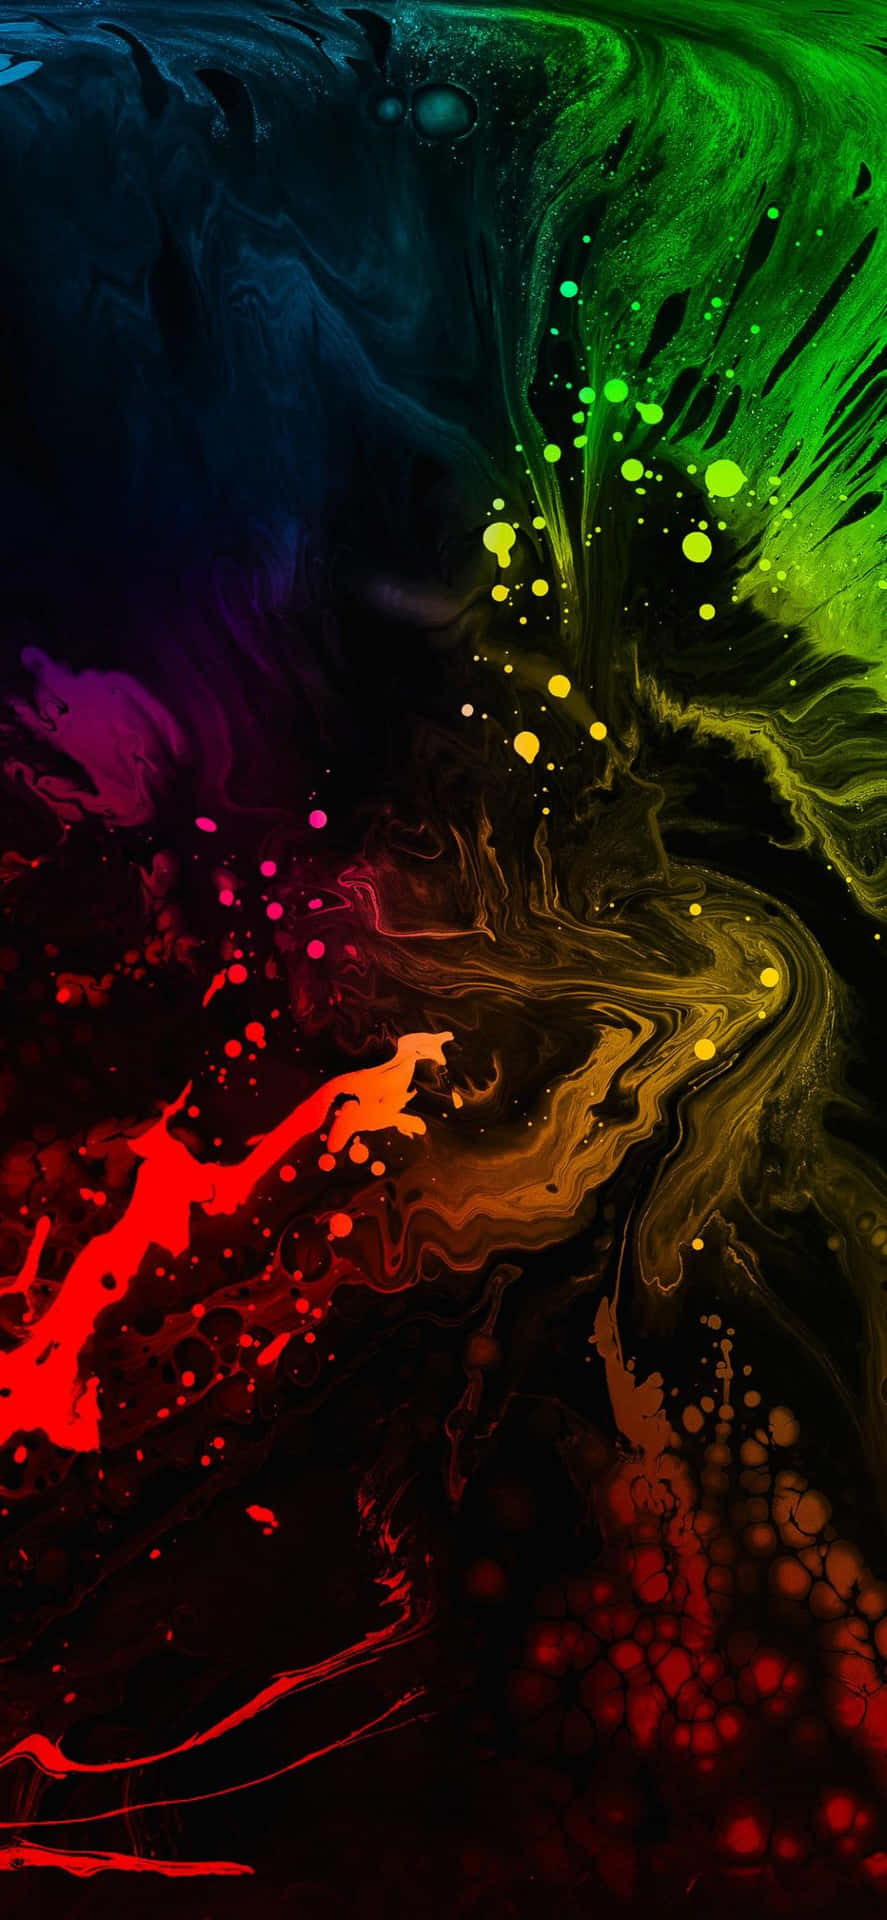 A Colorful Painting On A Black Background Wallpaper